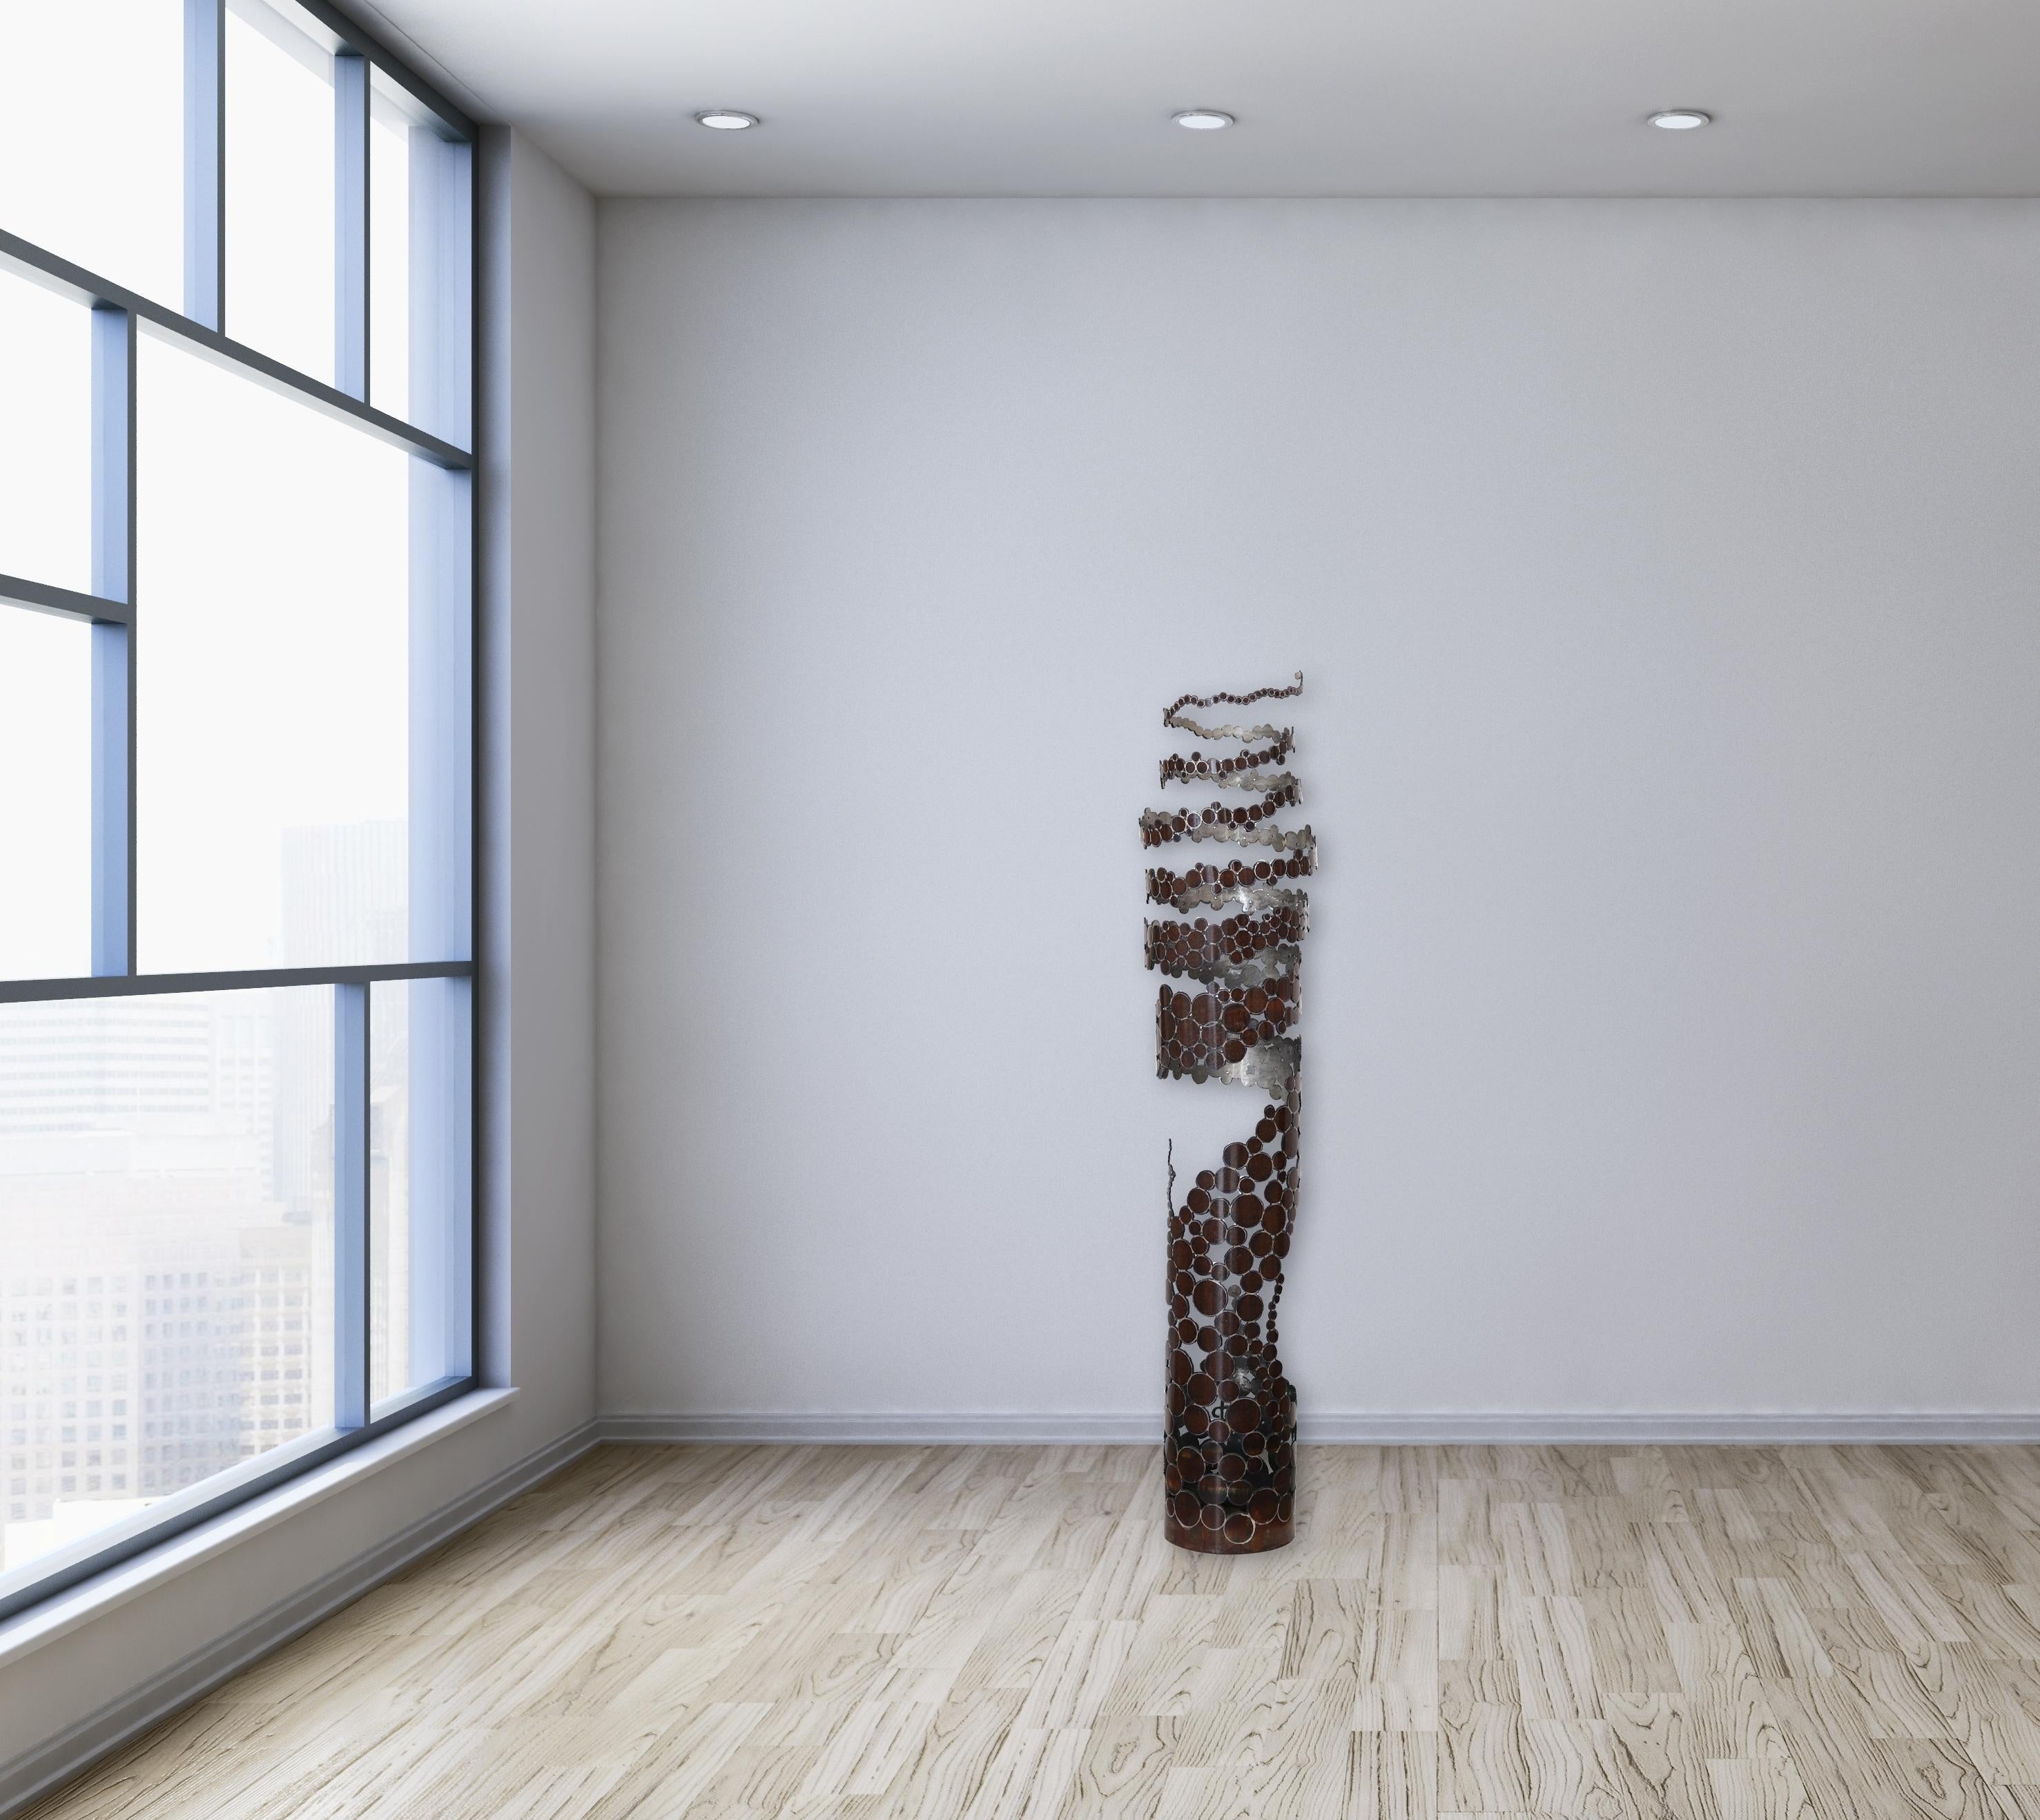 Focusing on making human-scale, abstract, minimalist, and often kinetic sculptures, D'Arcy Bellamy creates art exclusively from steel pipe. Bellamy’s work is characterized by flowing lines, strong negative space, originality, movement, and shadows.